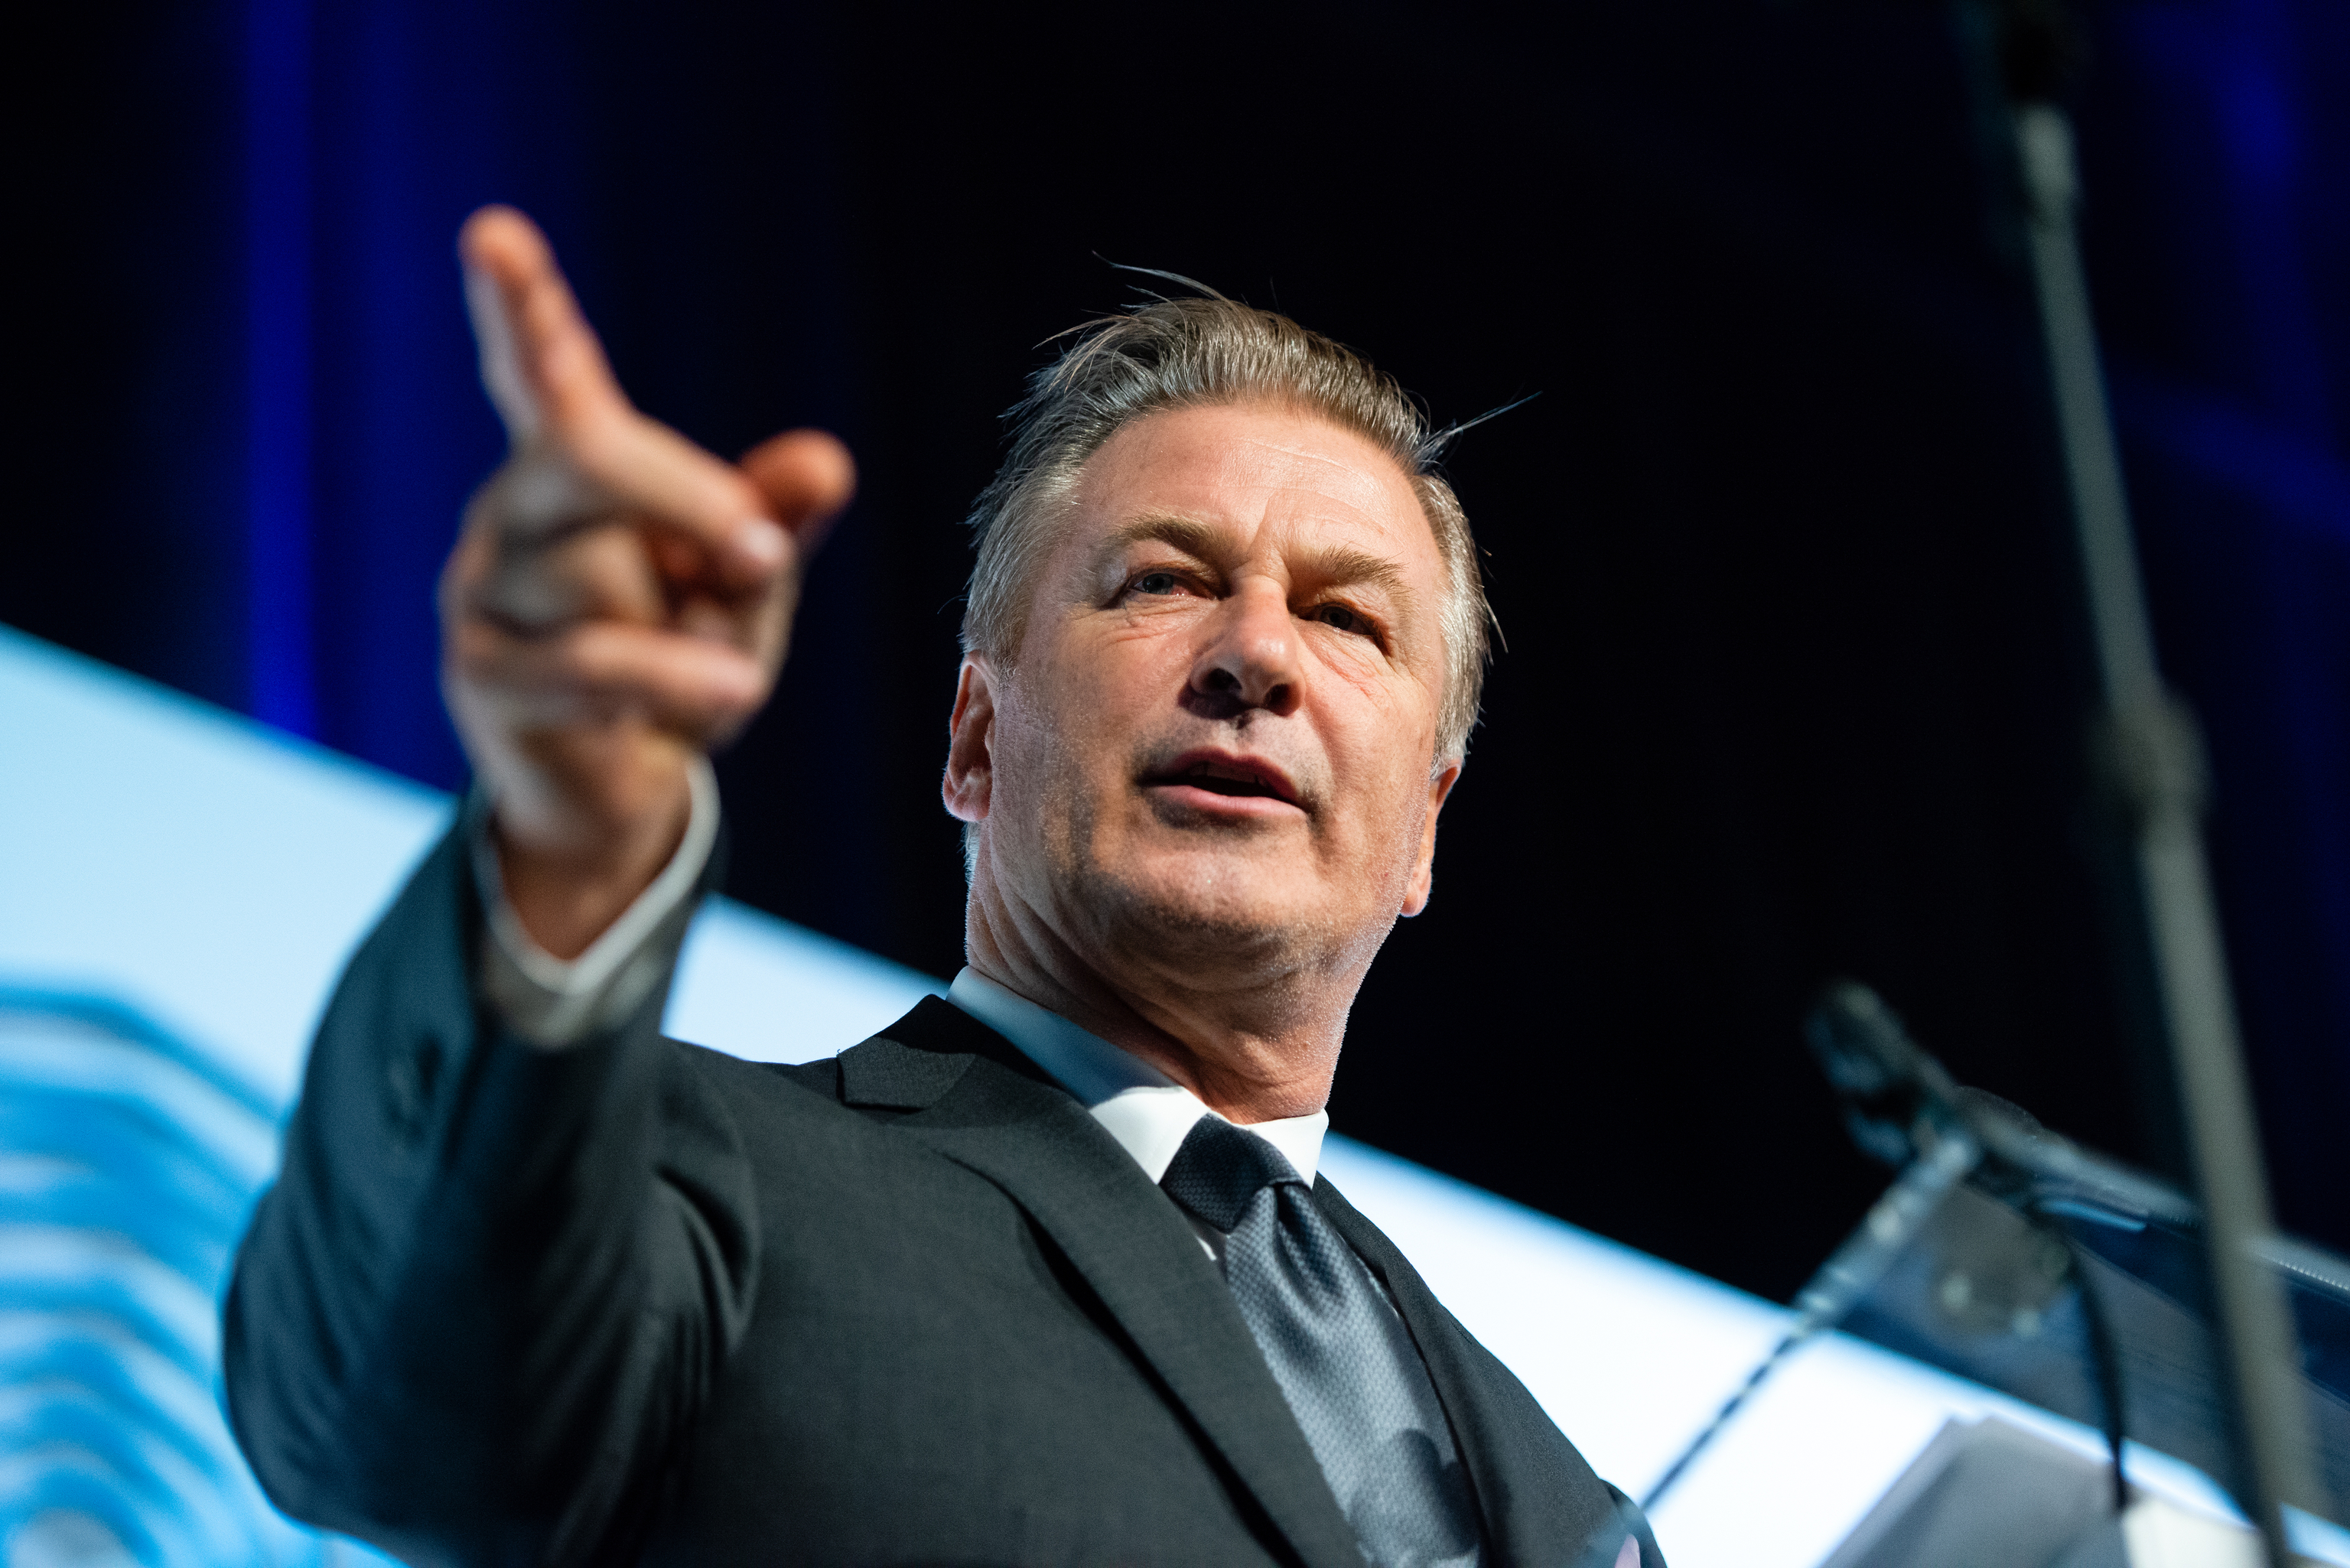 Actor Alec Baldwin emcees the United Nations Champions of the Earth Award Ceremony and Gala on September 26, 2019 in New York.